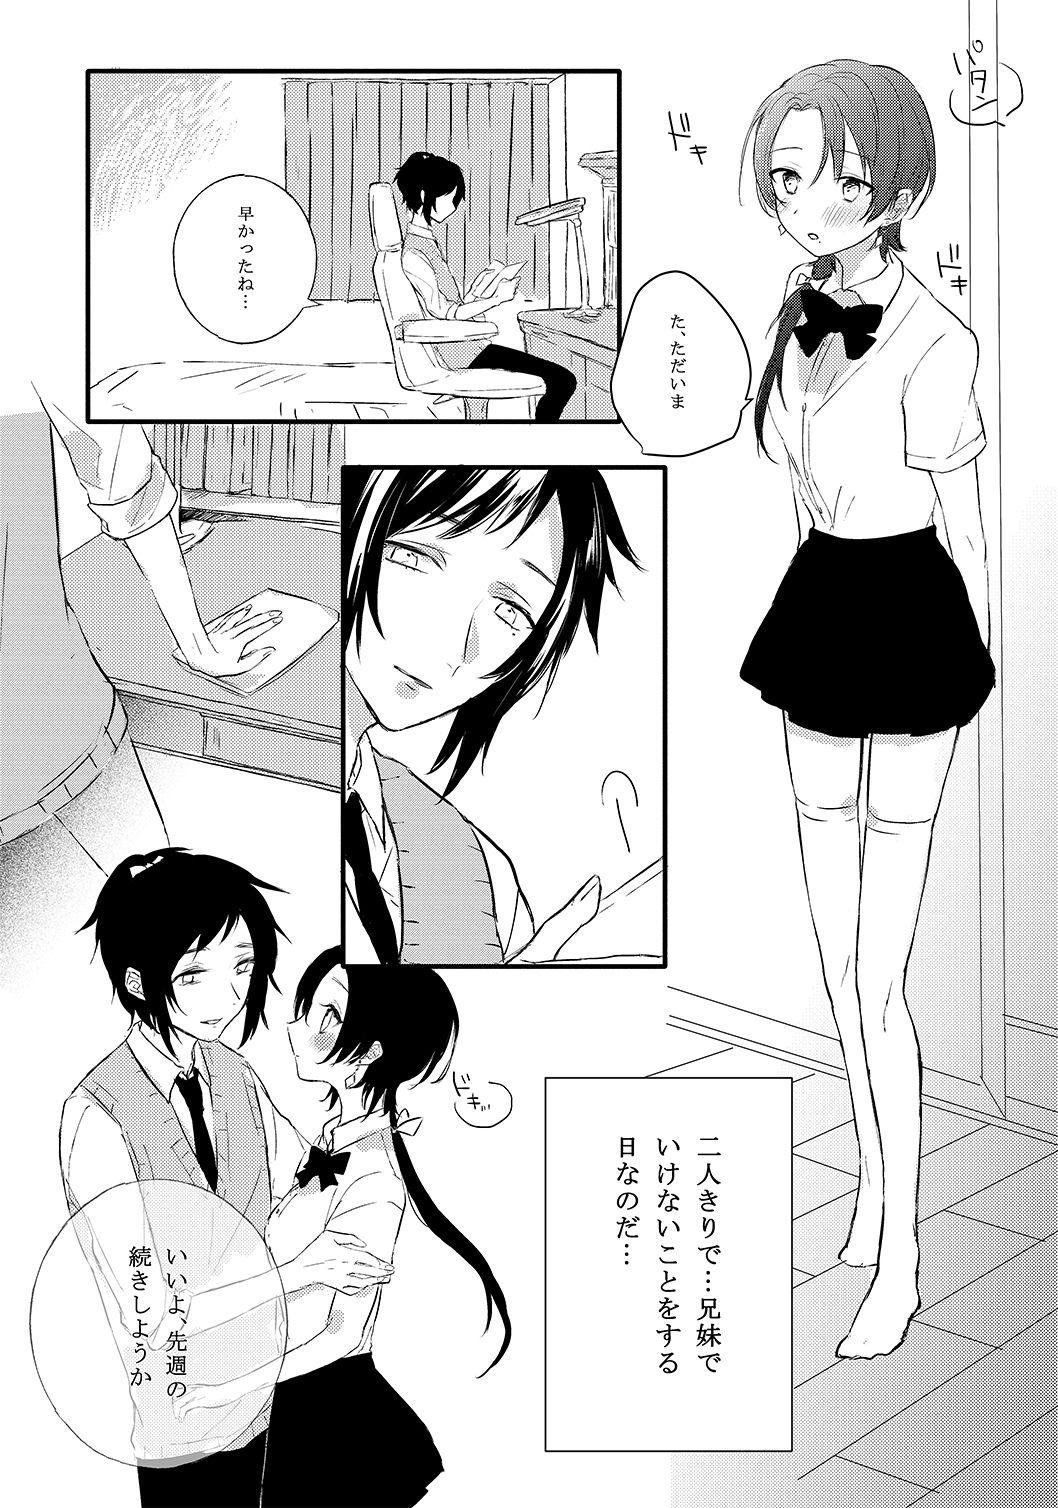 Gorda BROTHER COMPLEX + SISTER COMPLEX - Touken ranbu Gay Pawnshop - Page 4